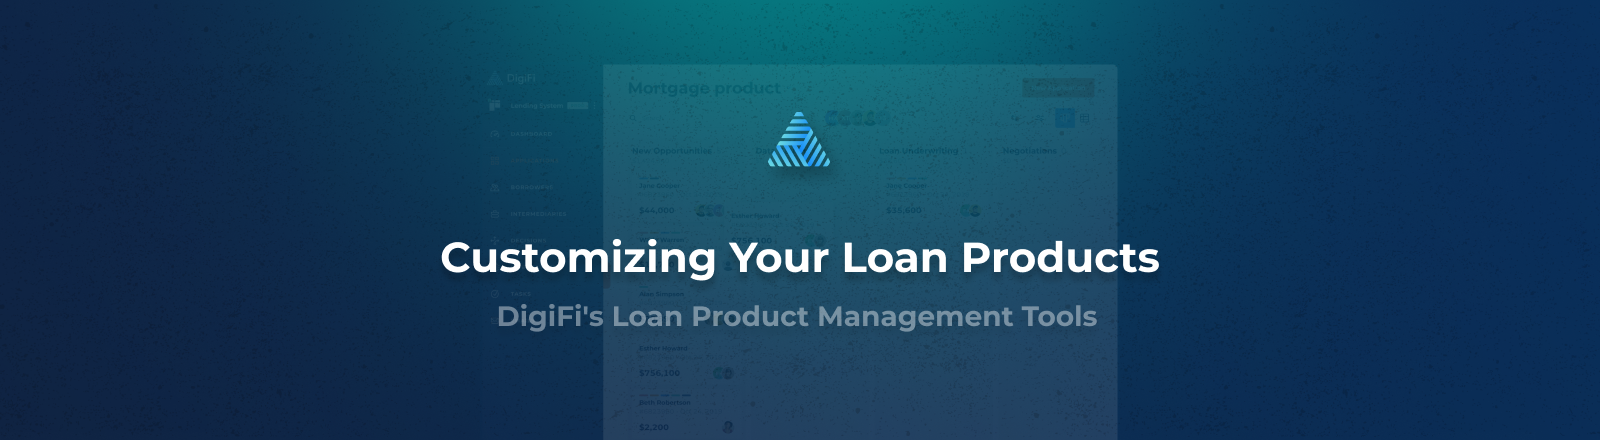 Customizing your loan products